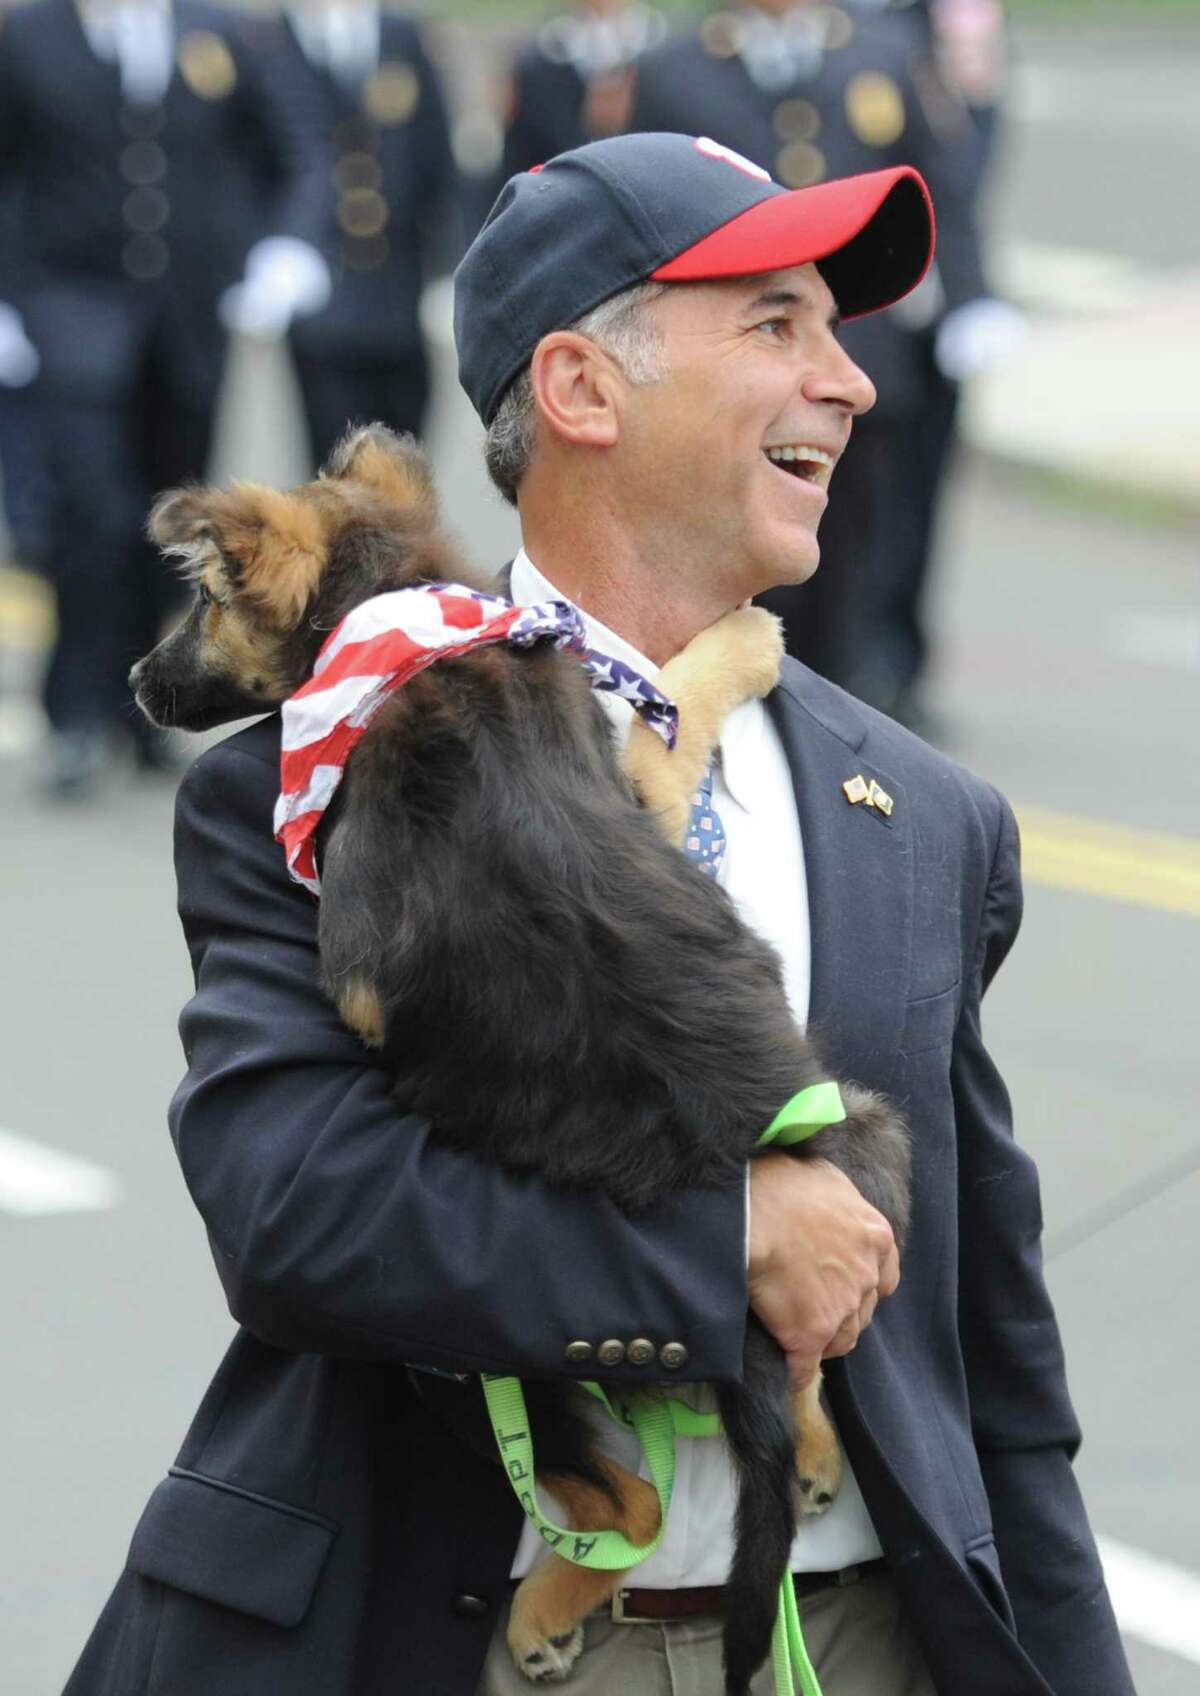 State Rep. Fred Camillo and his dog, Reagan, march in the Ninth District Veterans Association and the Glenville Volunteer Fire Company's annual Glenville Parade and Memorial Service in Greenwich, Conn. Sunday, May 27, 2018. Camillo will be sworn in as the new first selectman on Dec. 1.